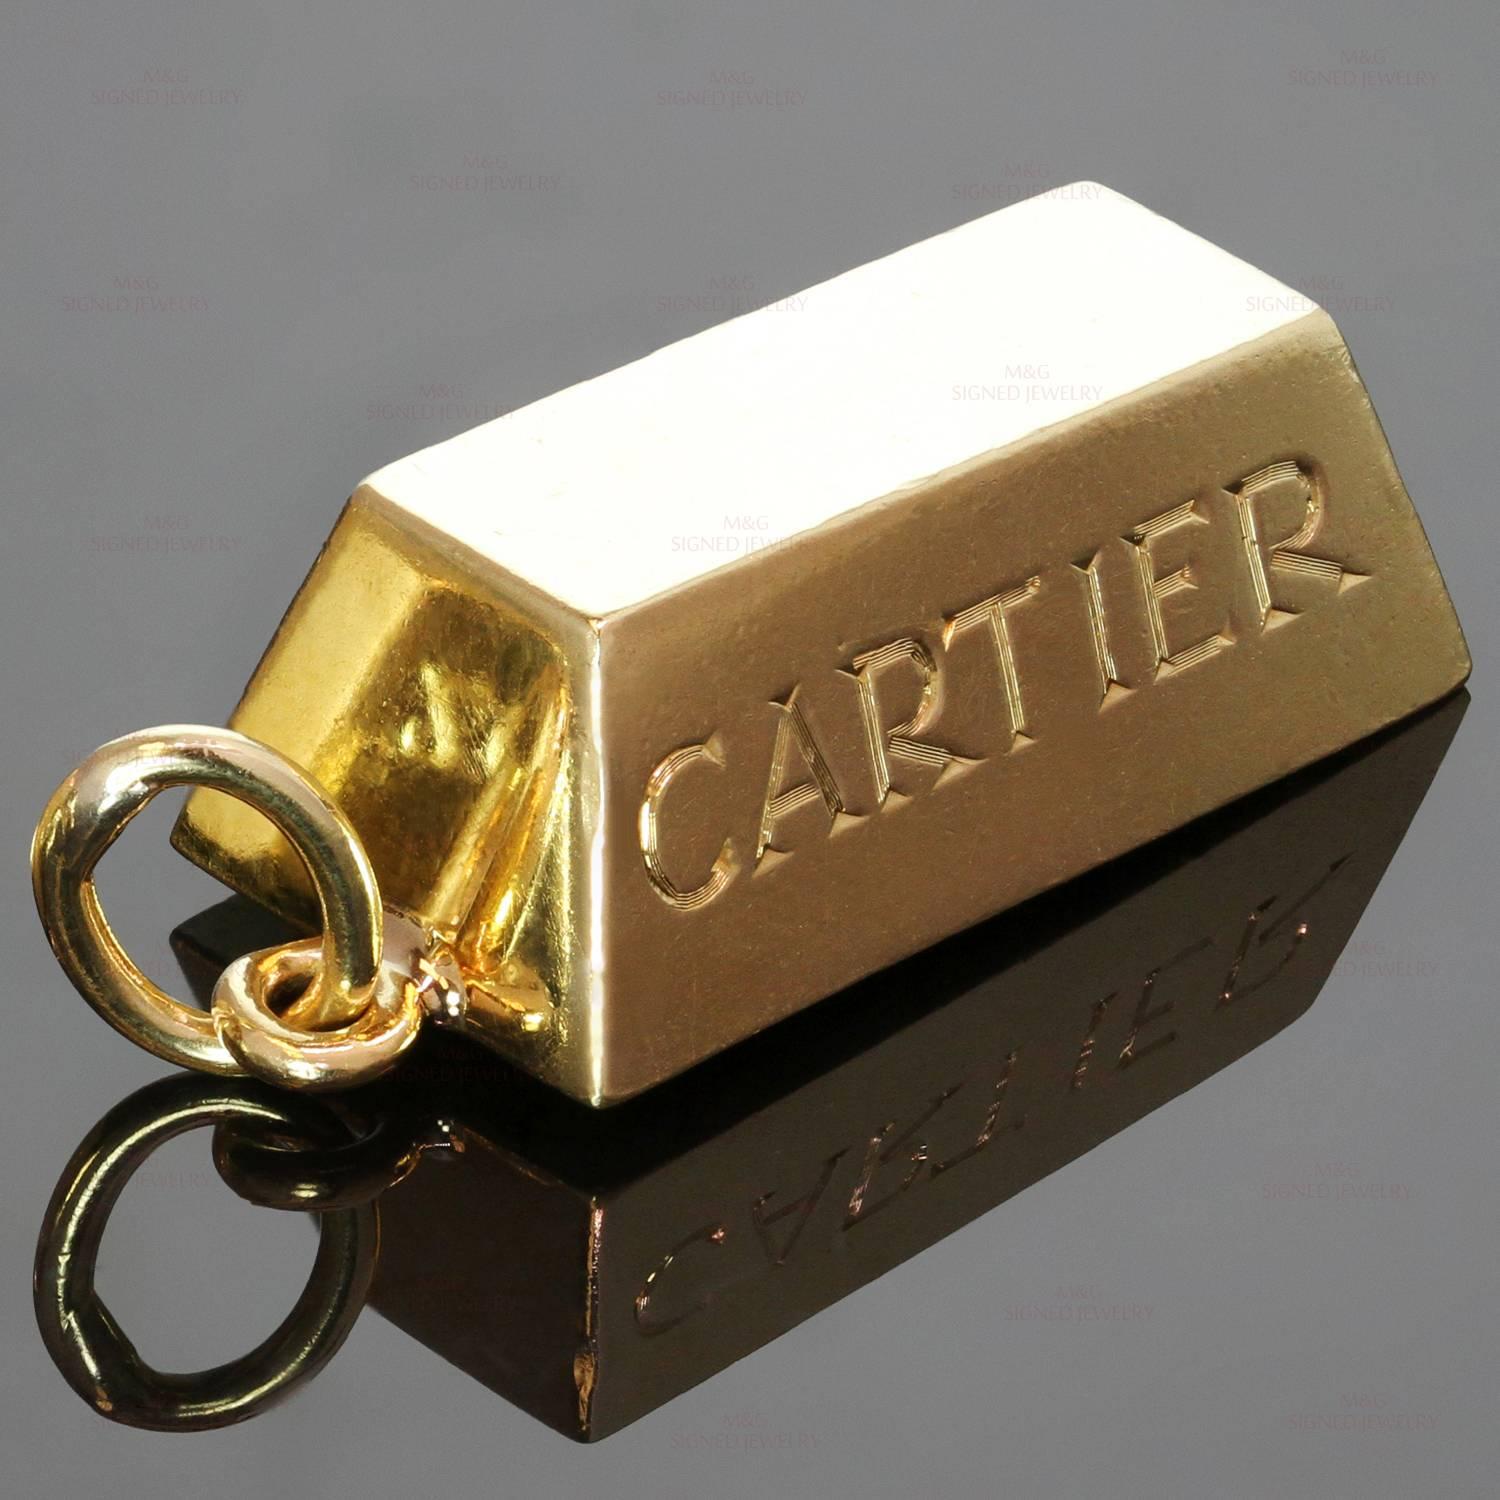 This classic Cartier 1 ounce ingot bar is crafted in solid 18k yellow gold. Made in France circa 1980s. Measurements: 0.51